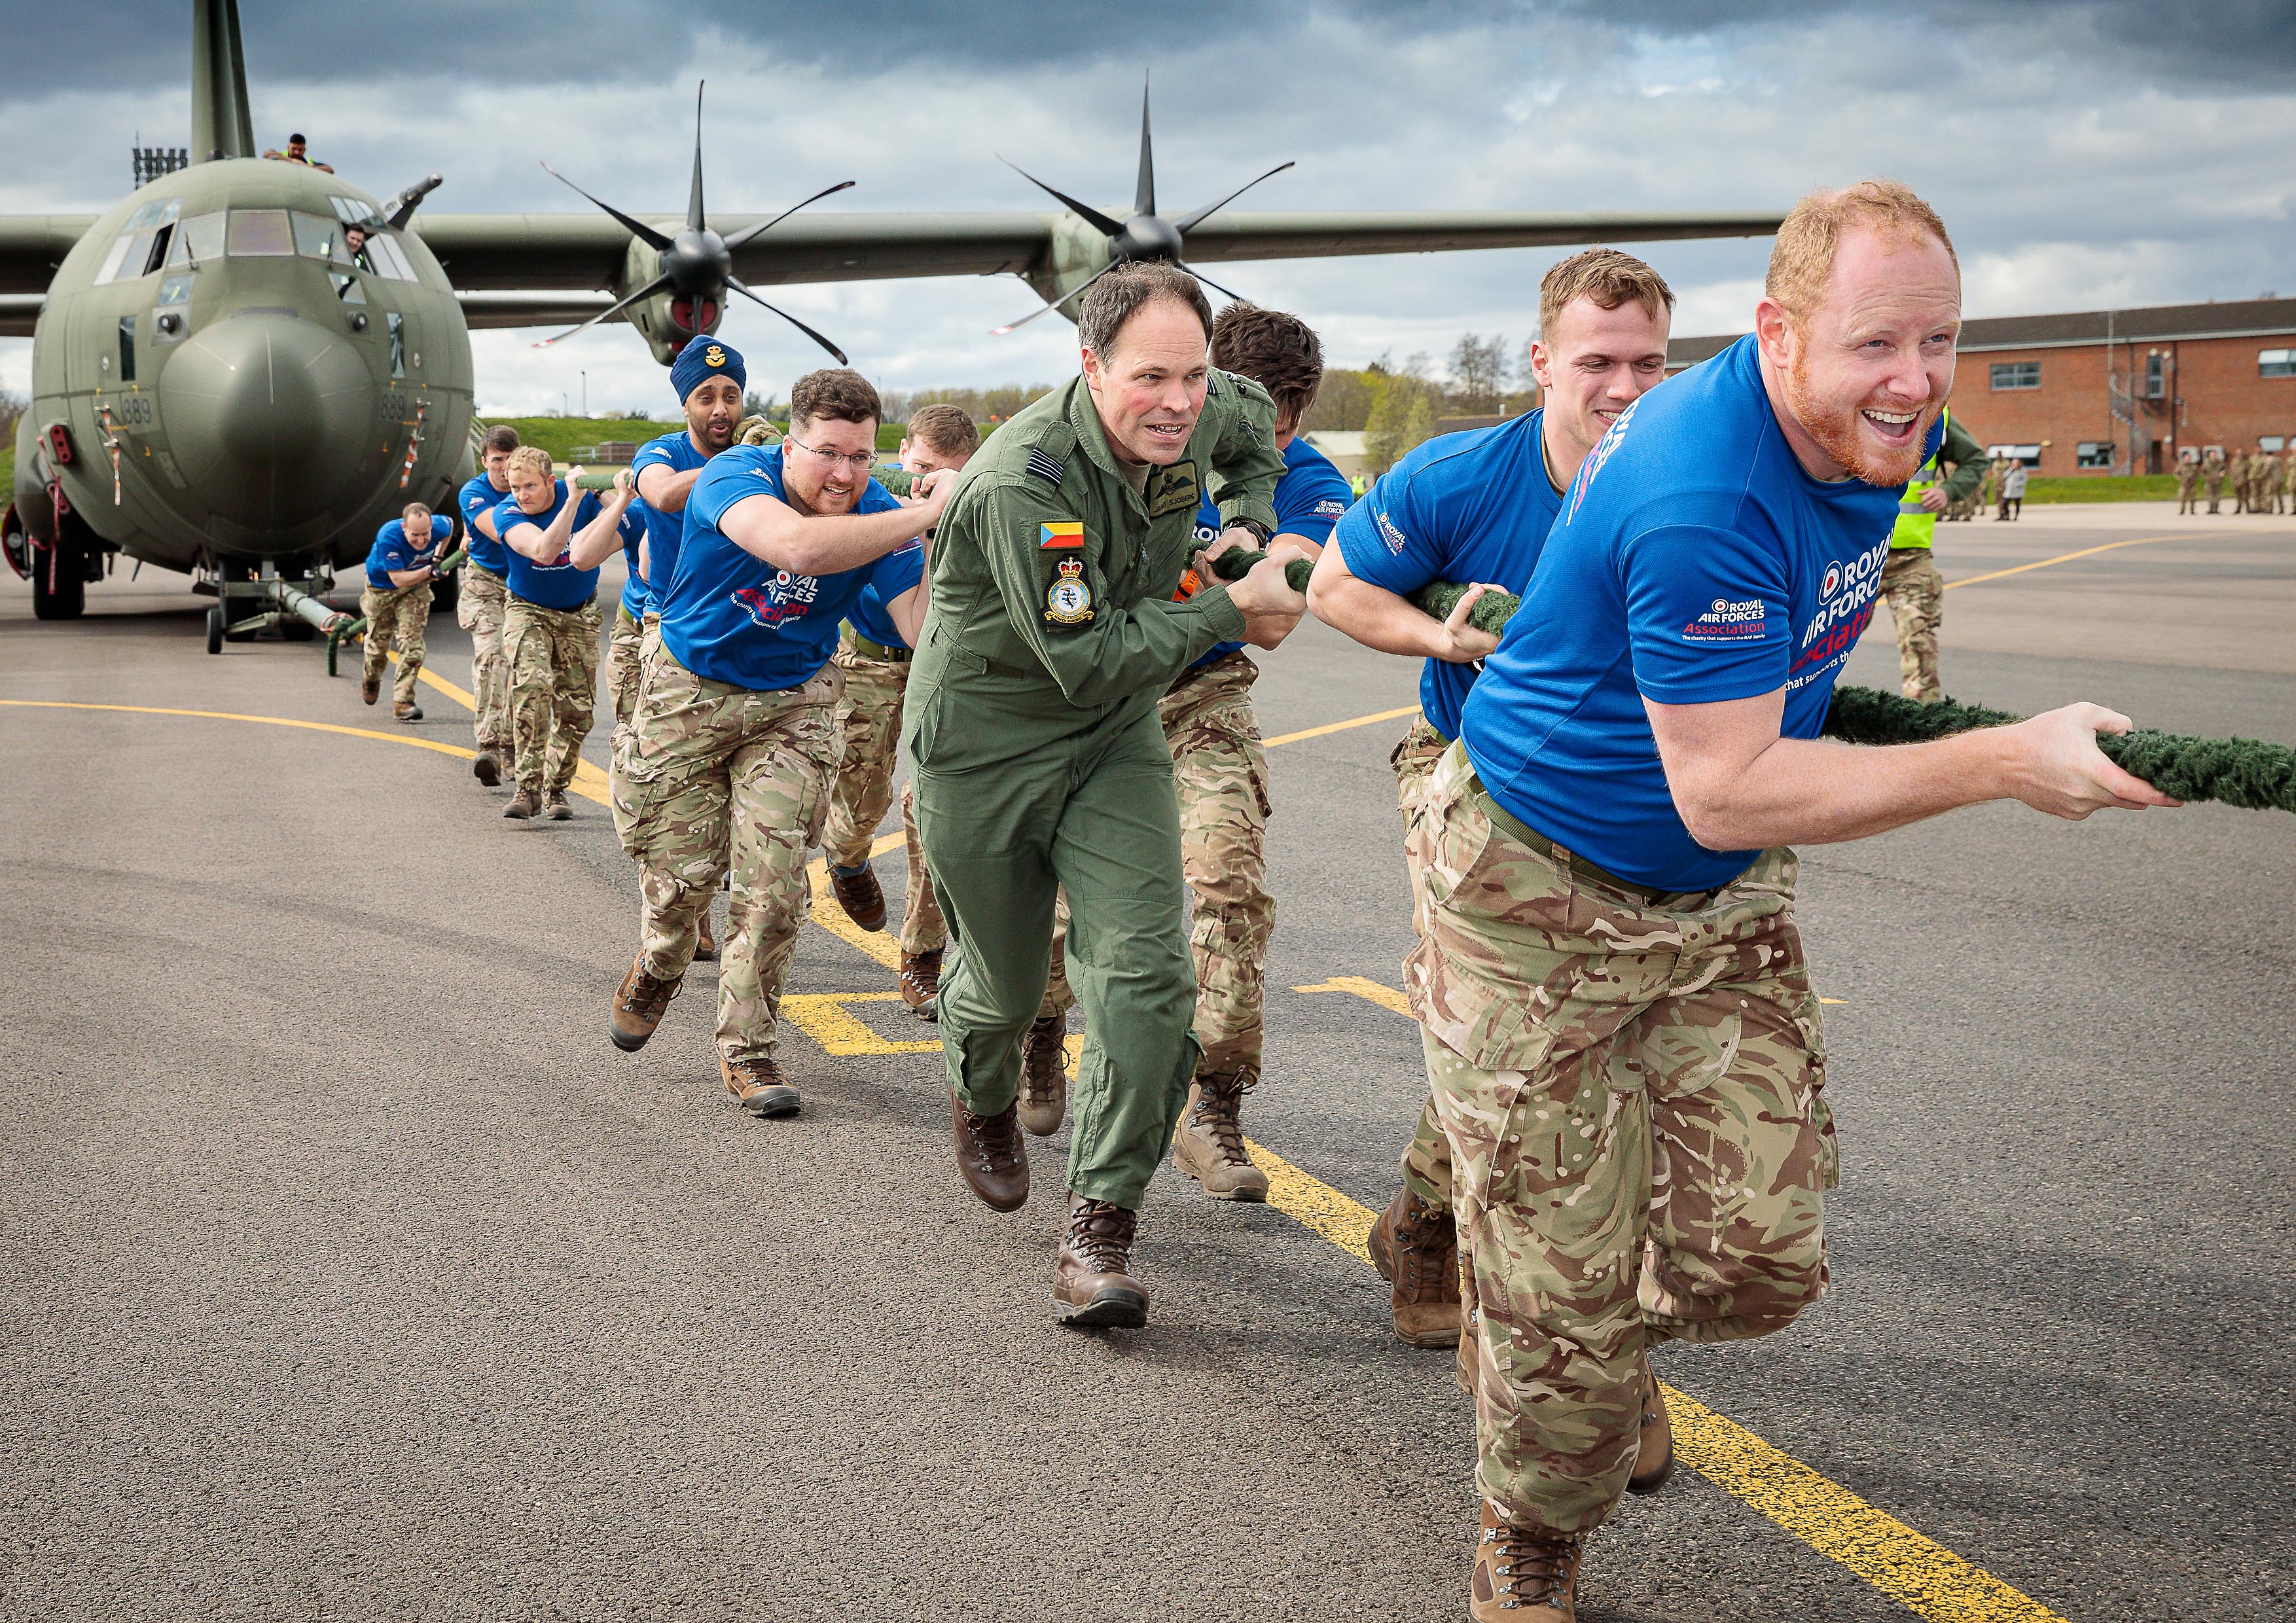 The Hercules Charity Pull took place at RAF Brize Norton on 5 Apr 22, raising money for two extremely deserving charities.